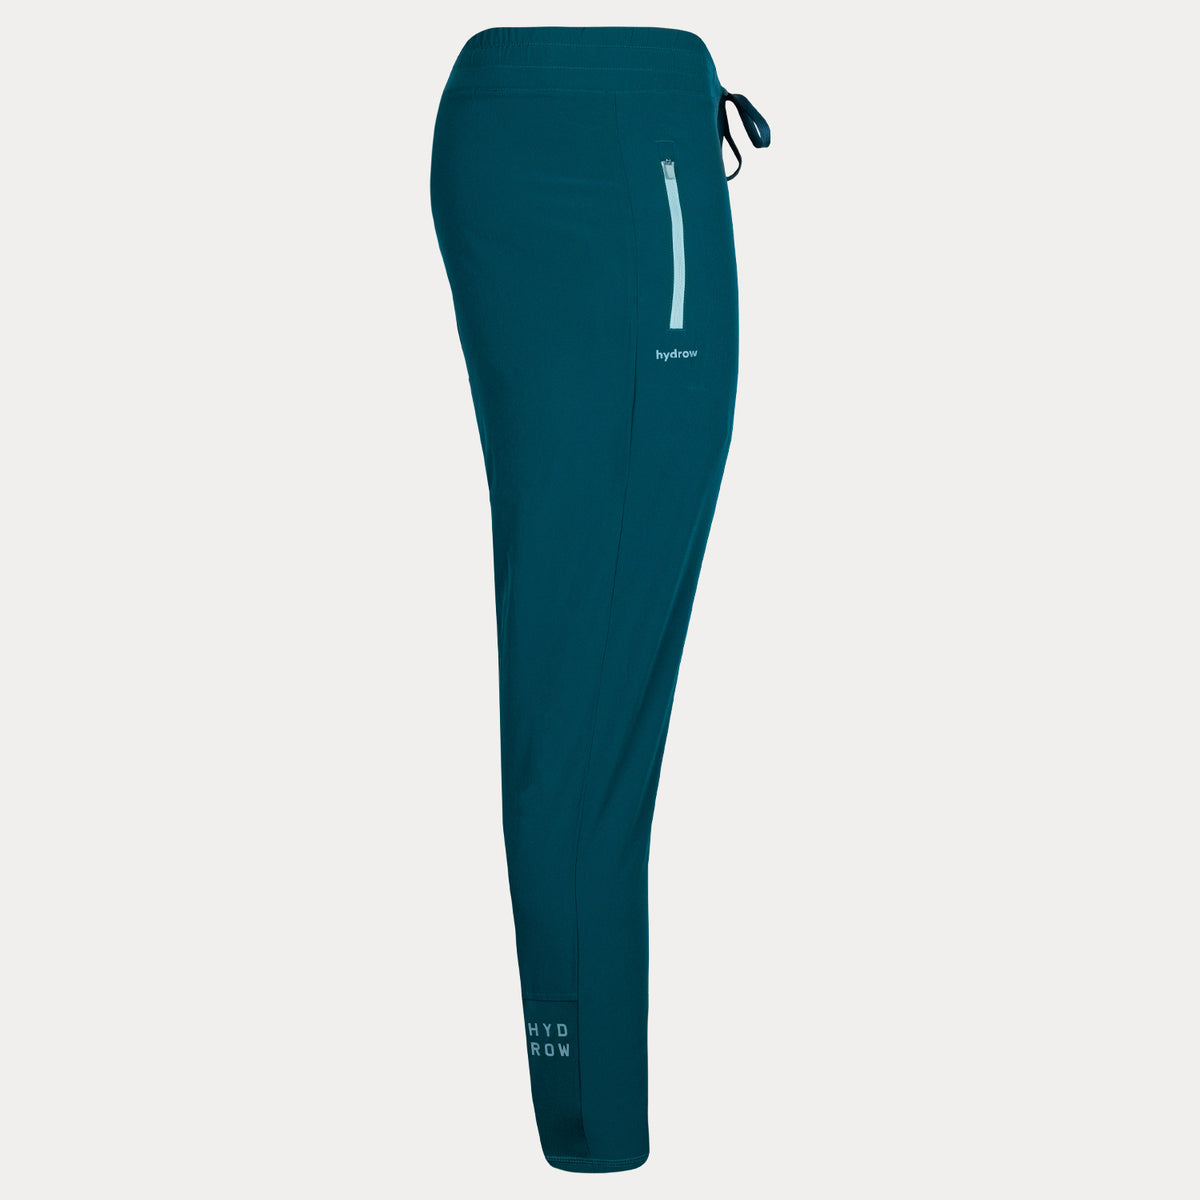 side view of dark blue unisex rowing pant showing hydrow logo on ankle